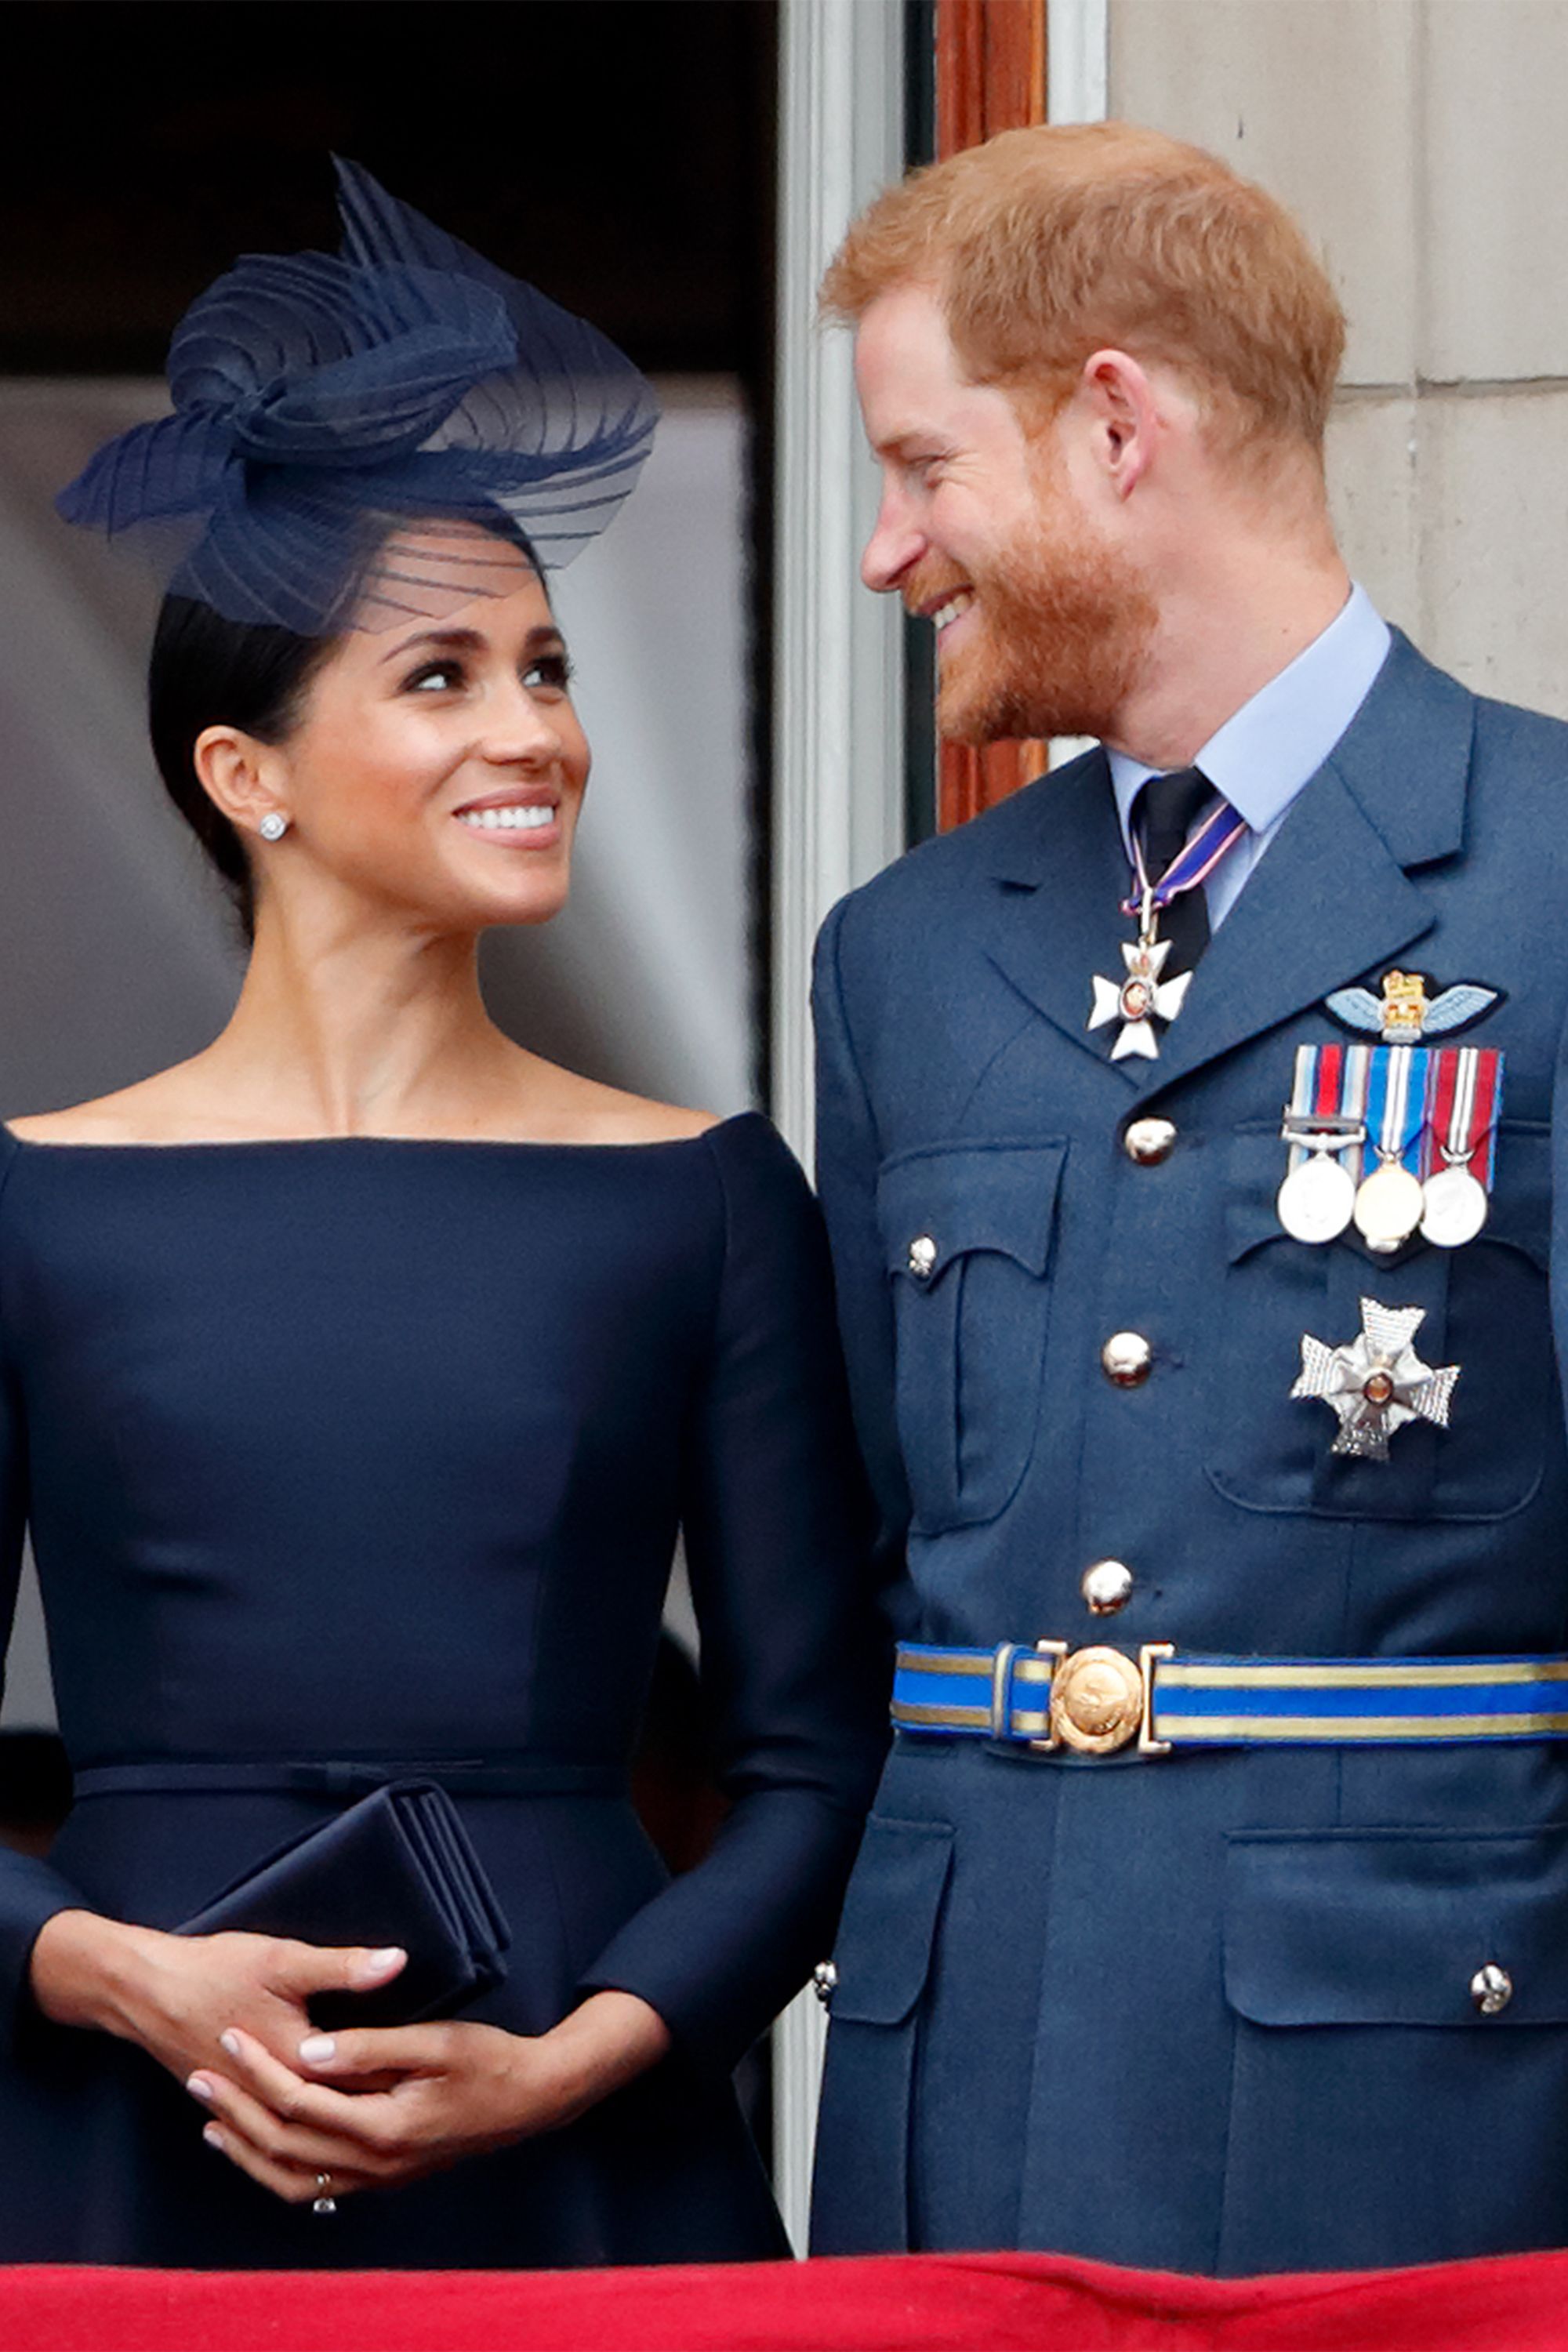 https://hips.hearstapps.com/hmg-prod.s3.amazonaws.com/images/hbz-prince-harry-meghan-markle-cute-moments-2018-07-gettyimages-997308004-1557334673.jpg?crop=1xw:1xh;center,top